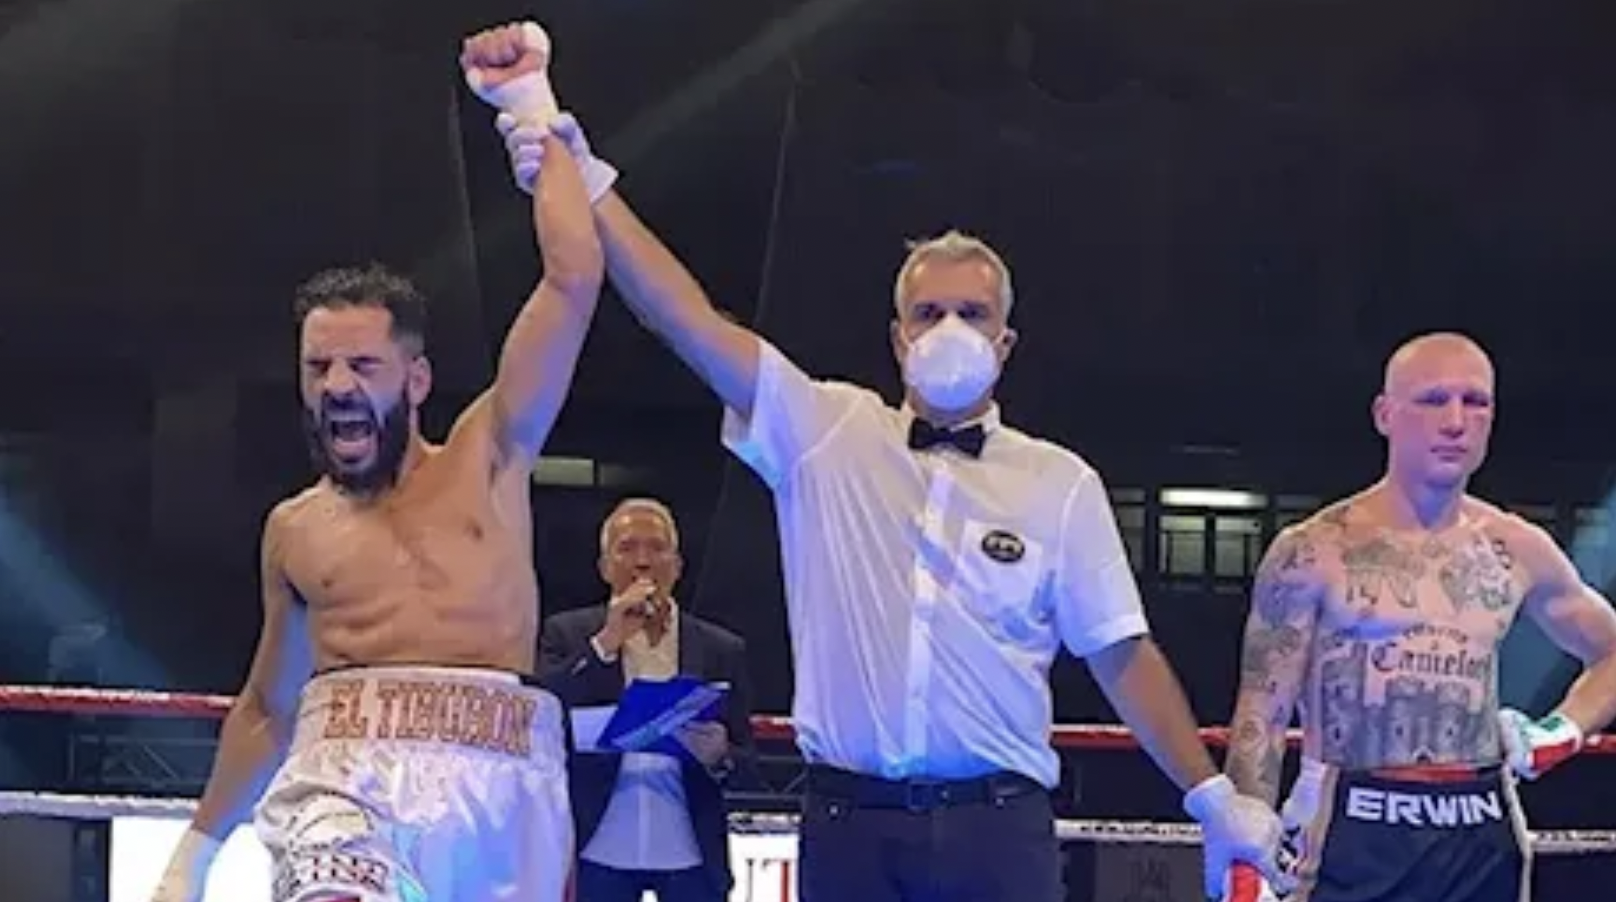 Italian boxer of Moroccan origins beats rival with Nazi tattoos for title |  Middle East Eye